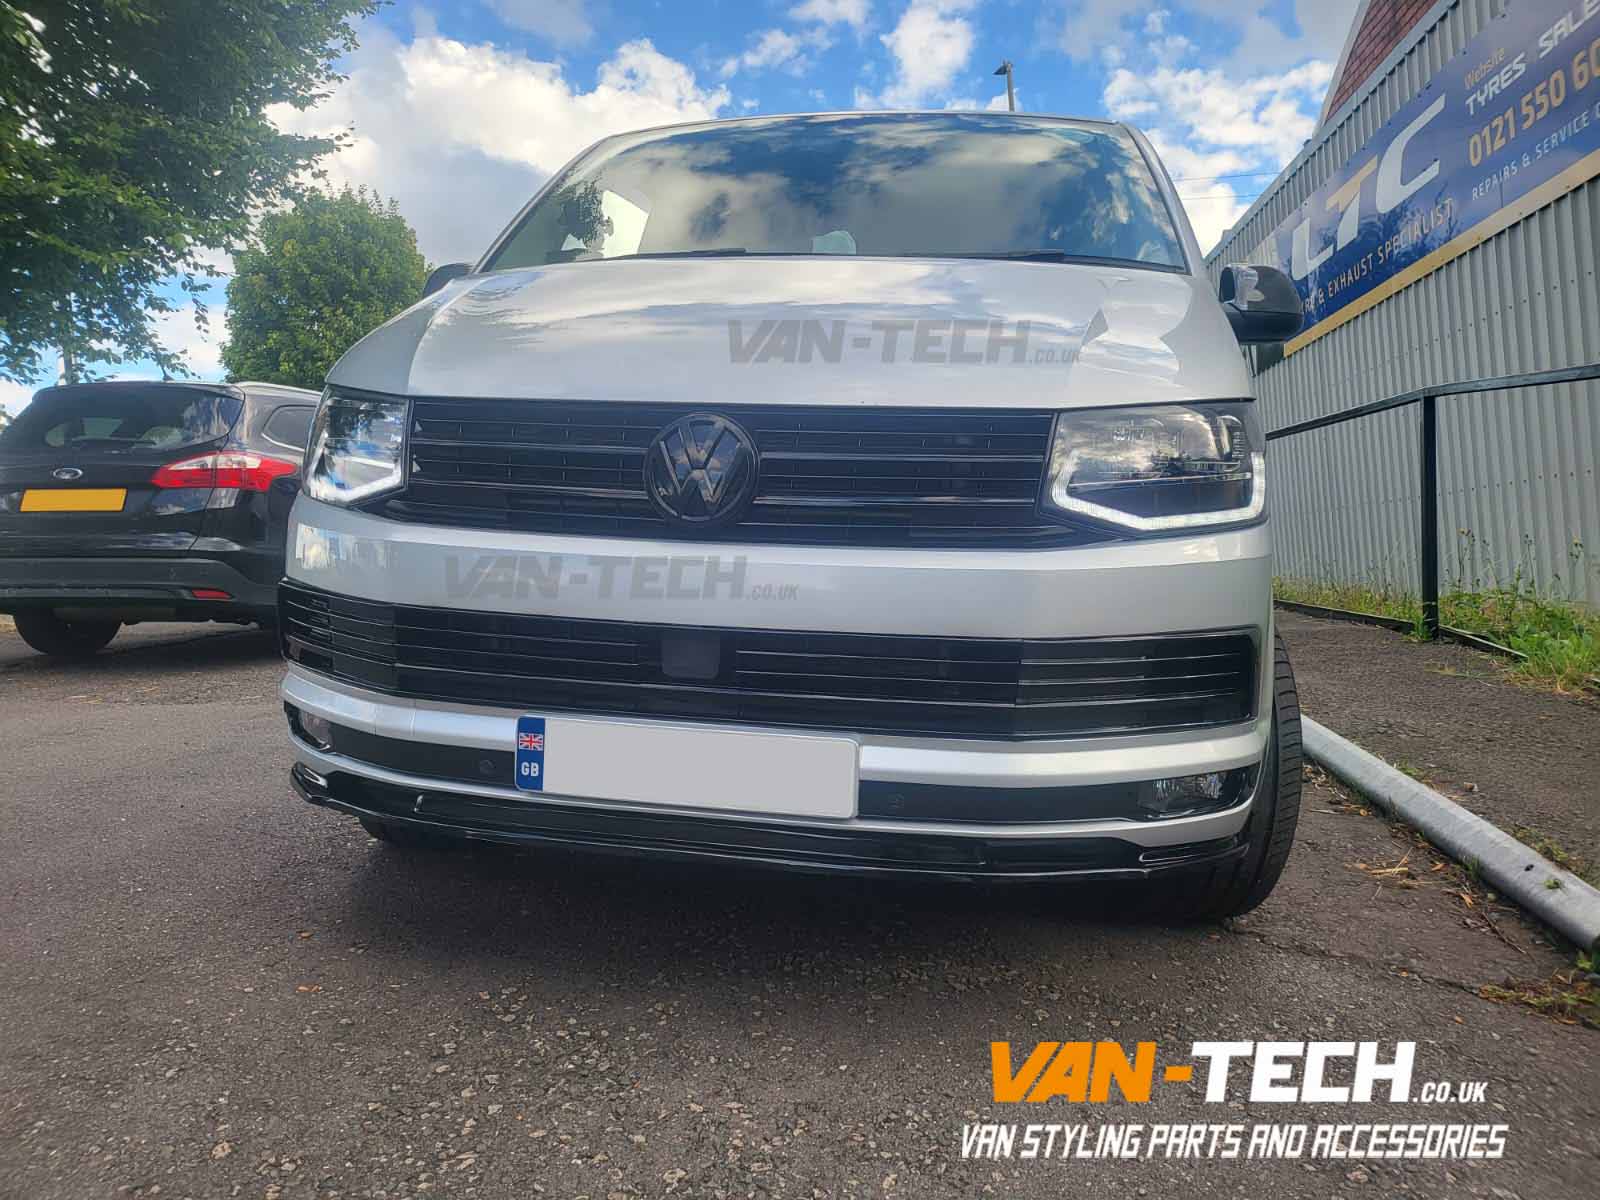 VW Transporter T6 Parts and Accessories - Headlights, Grille , Middle Inserts and Lower Splitter